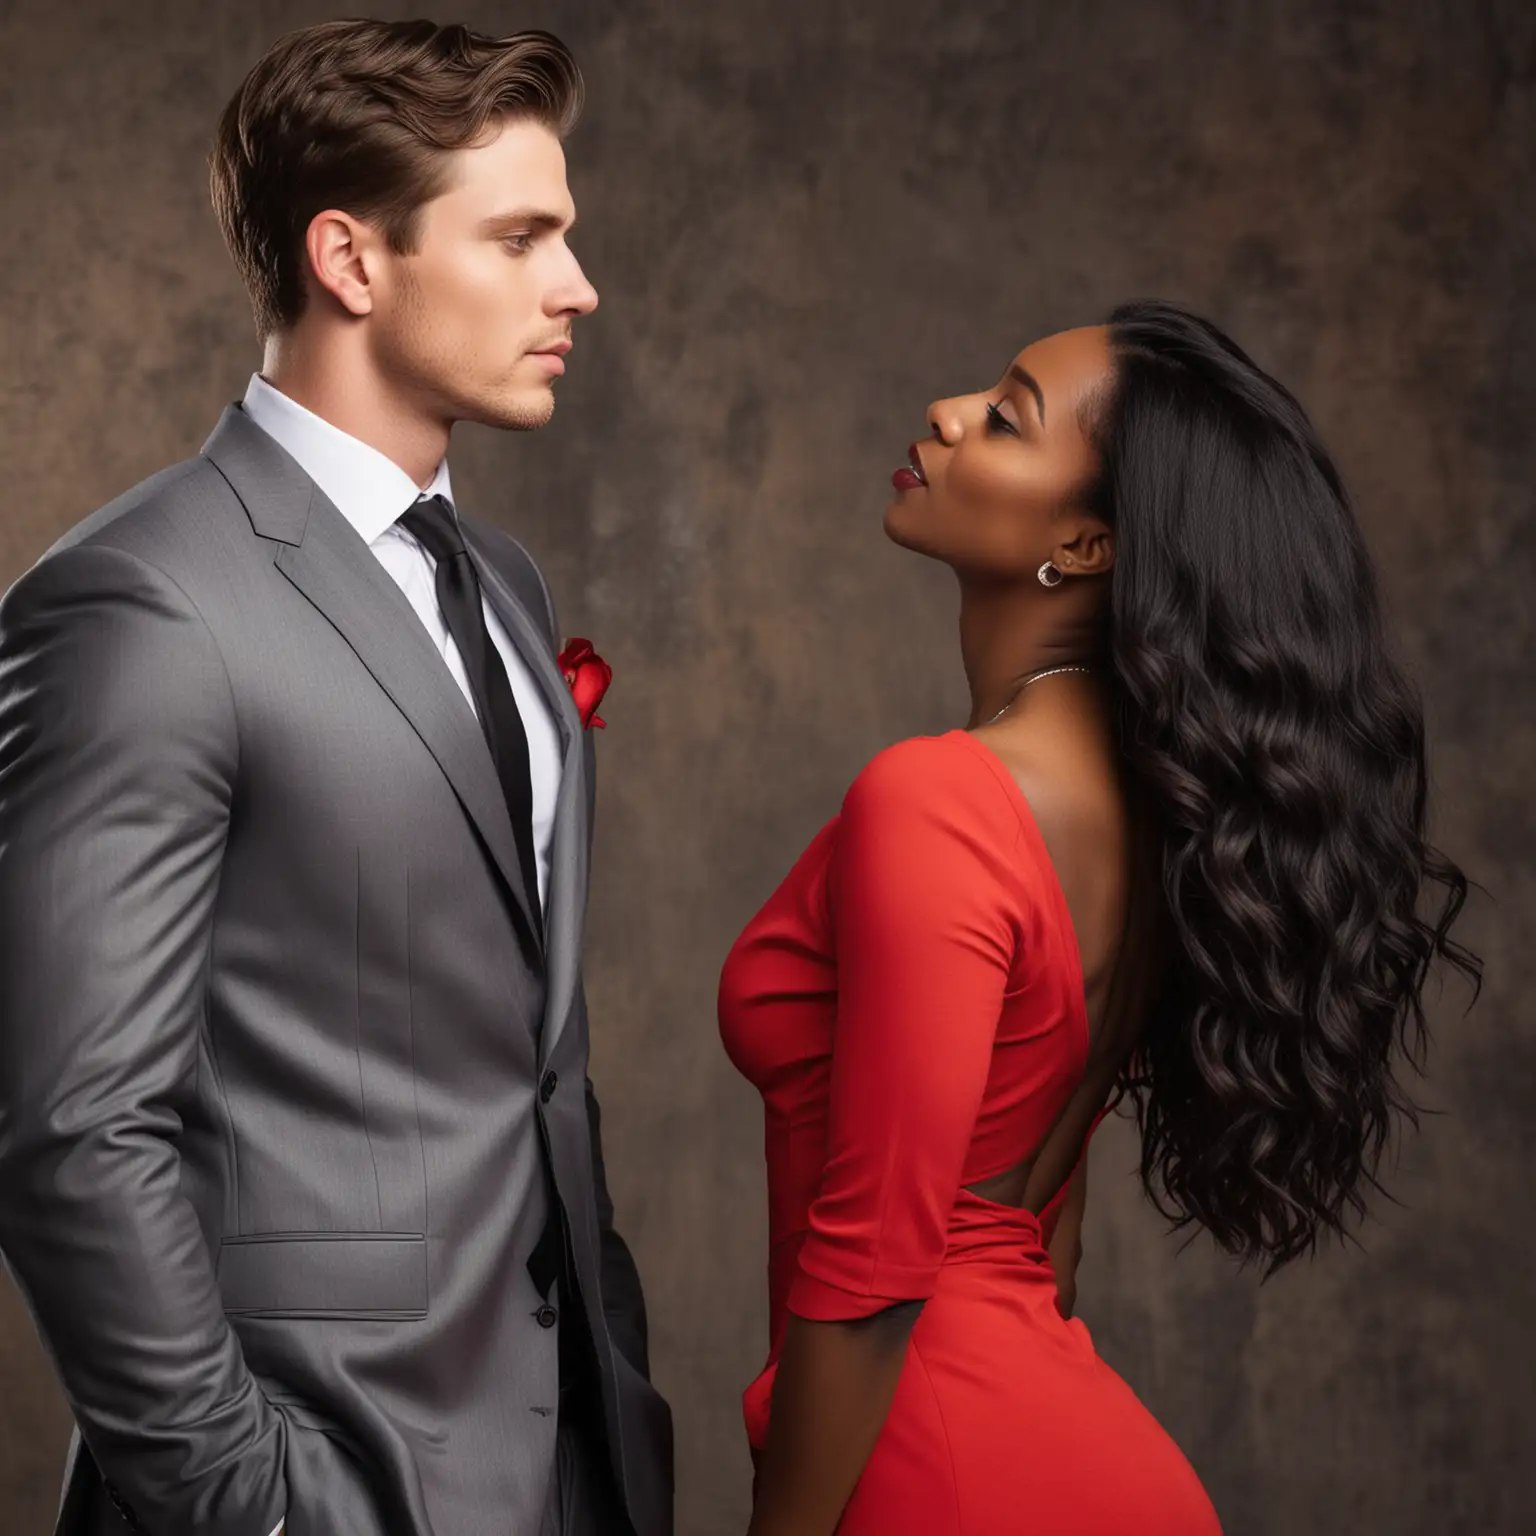 interracial romance couple, dark haired gorgeous 
white male model in suit looking at gorgeous black woman in red dress who is looking up at him, sensual






